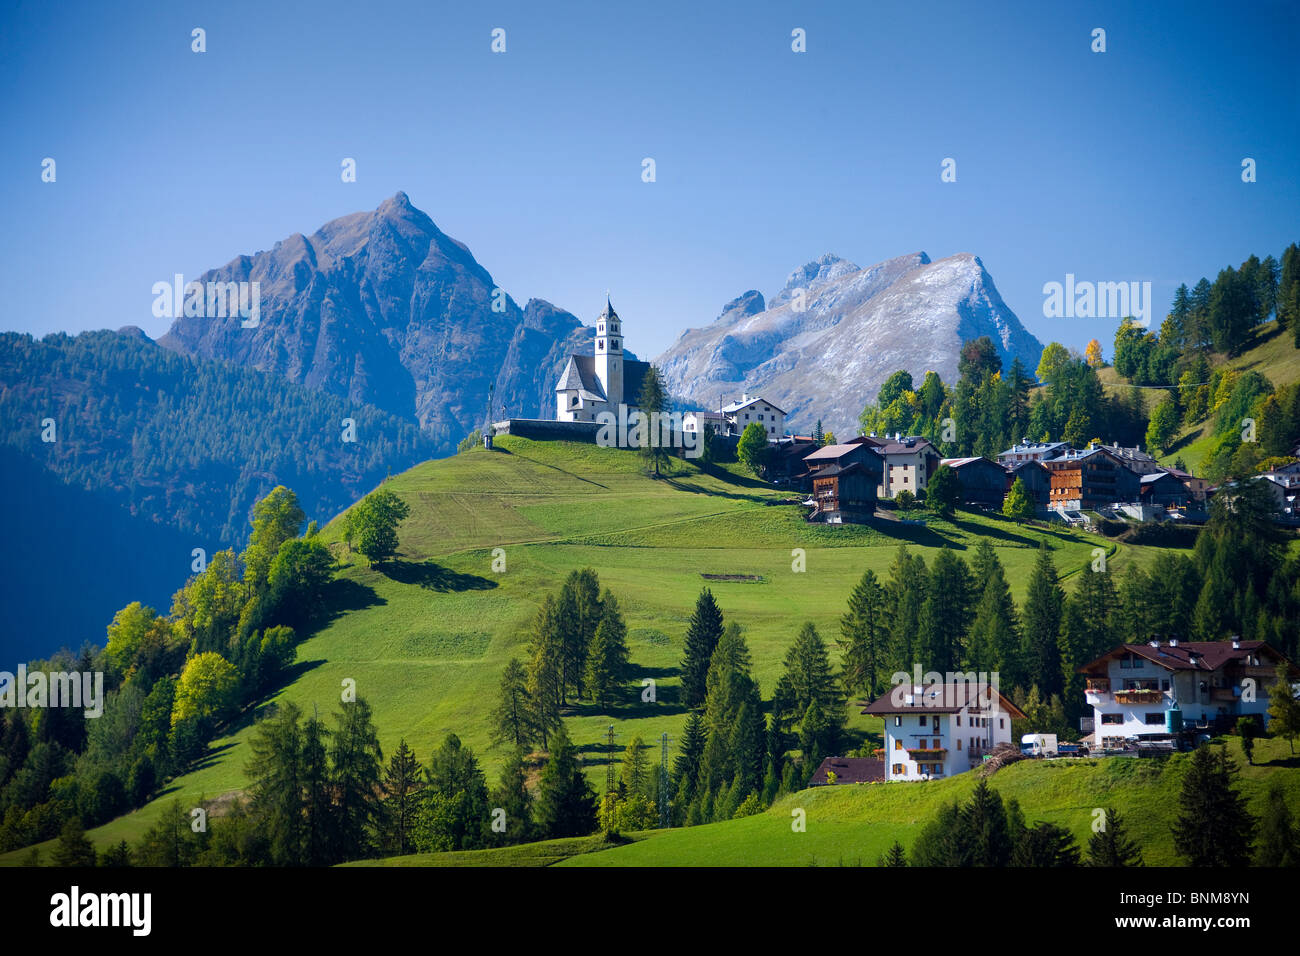 Italy Alps Veneto Dolomites Cadore hill wood forest meadows holidays travel, Stock Photo